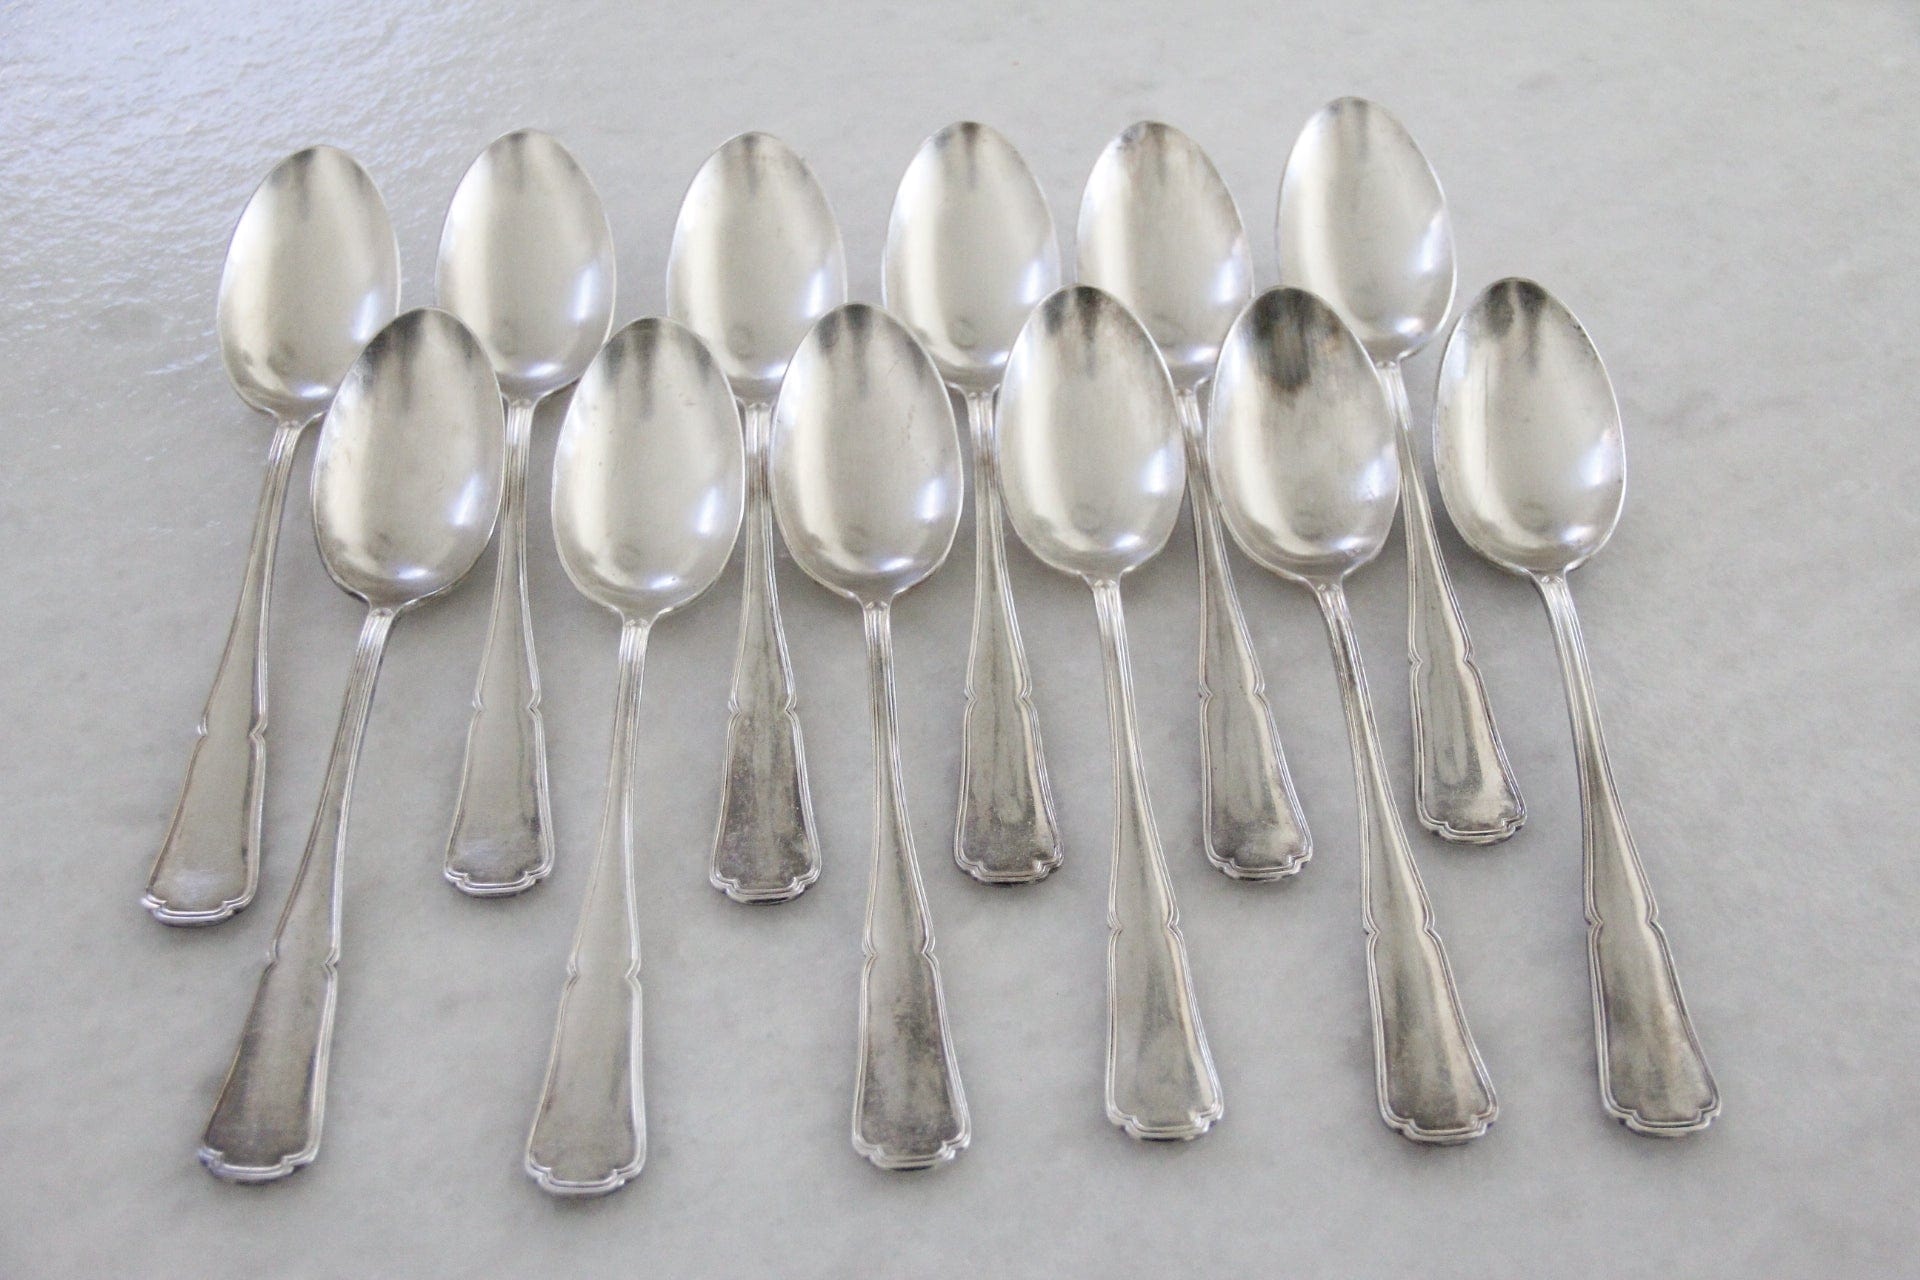 Antique French Silver Tablespoon | Flatware 4 Pcs. - Debra Hall Lifestyle